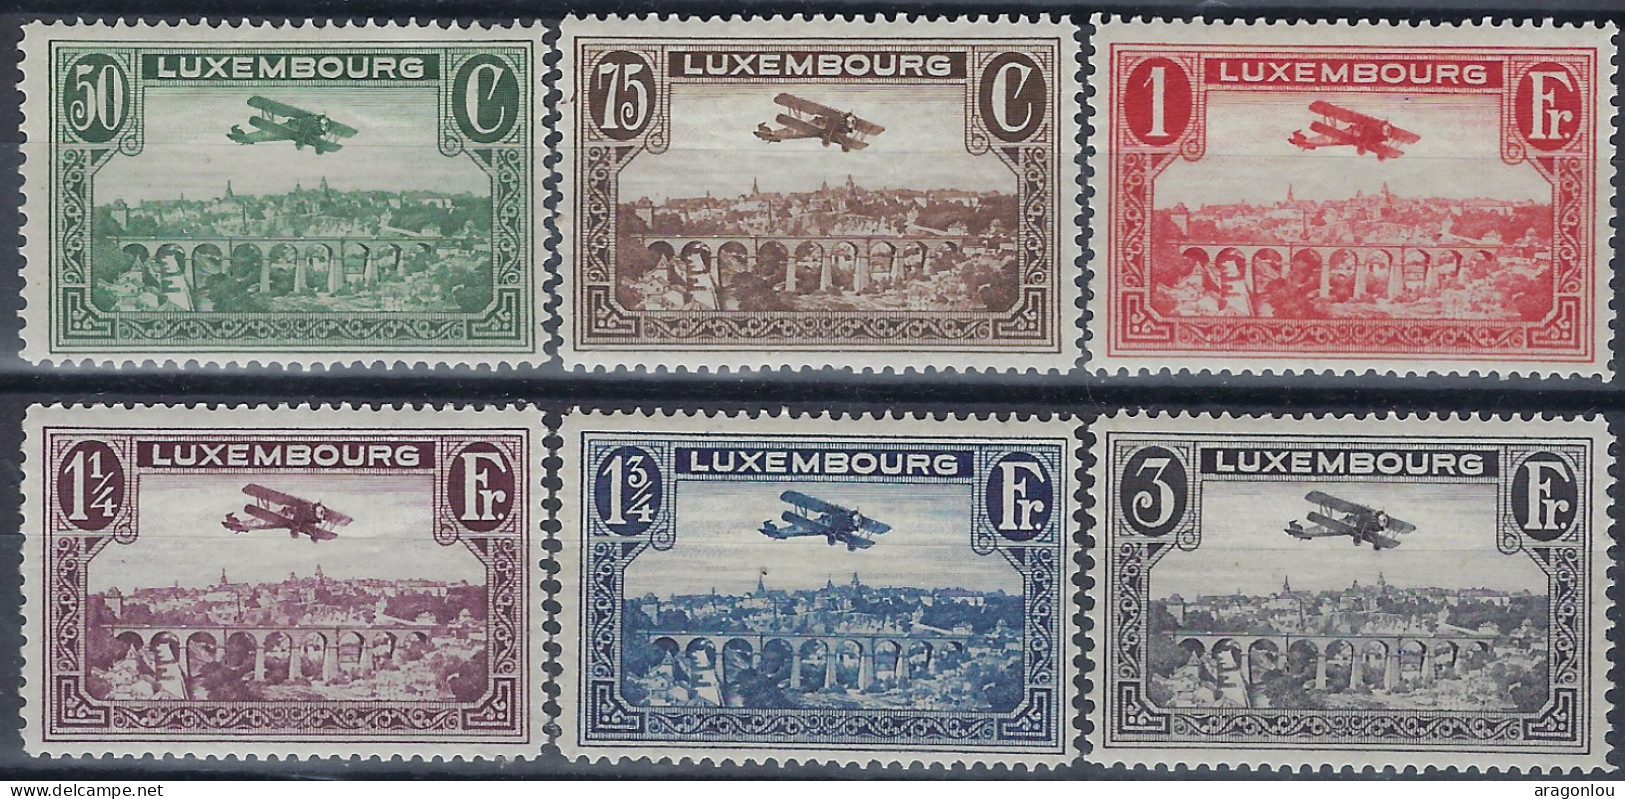 Luxembourg - Luxemburg - Timbres  1931      2 Séries   Biplan  Breguet     MNH** - Unused Stamps